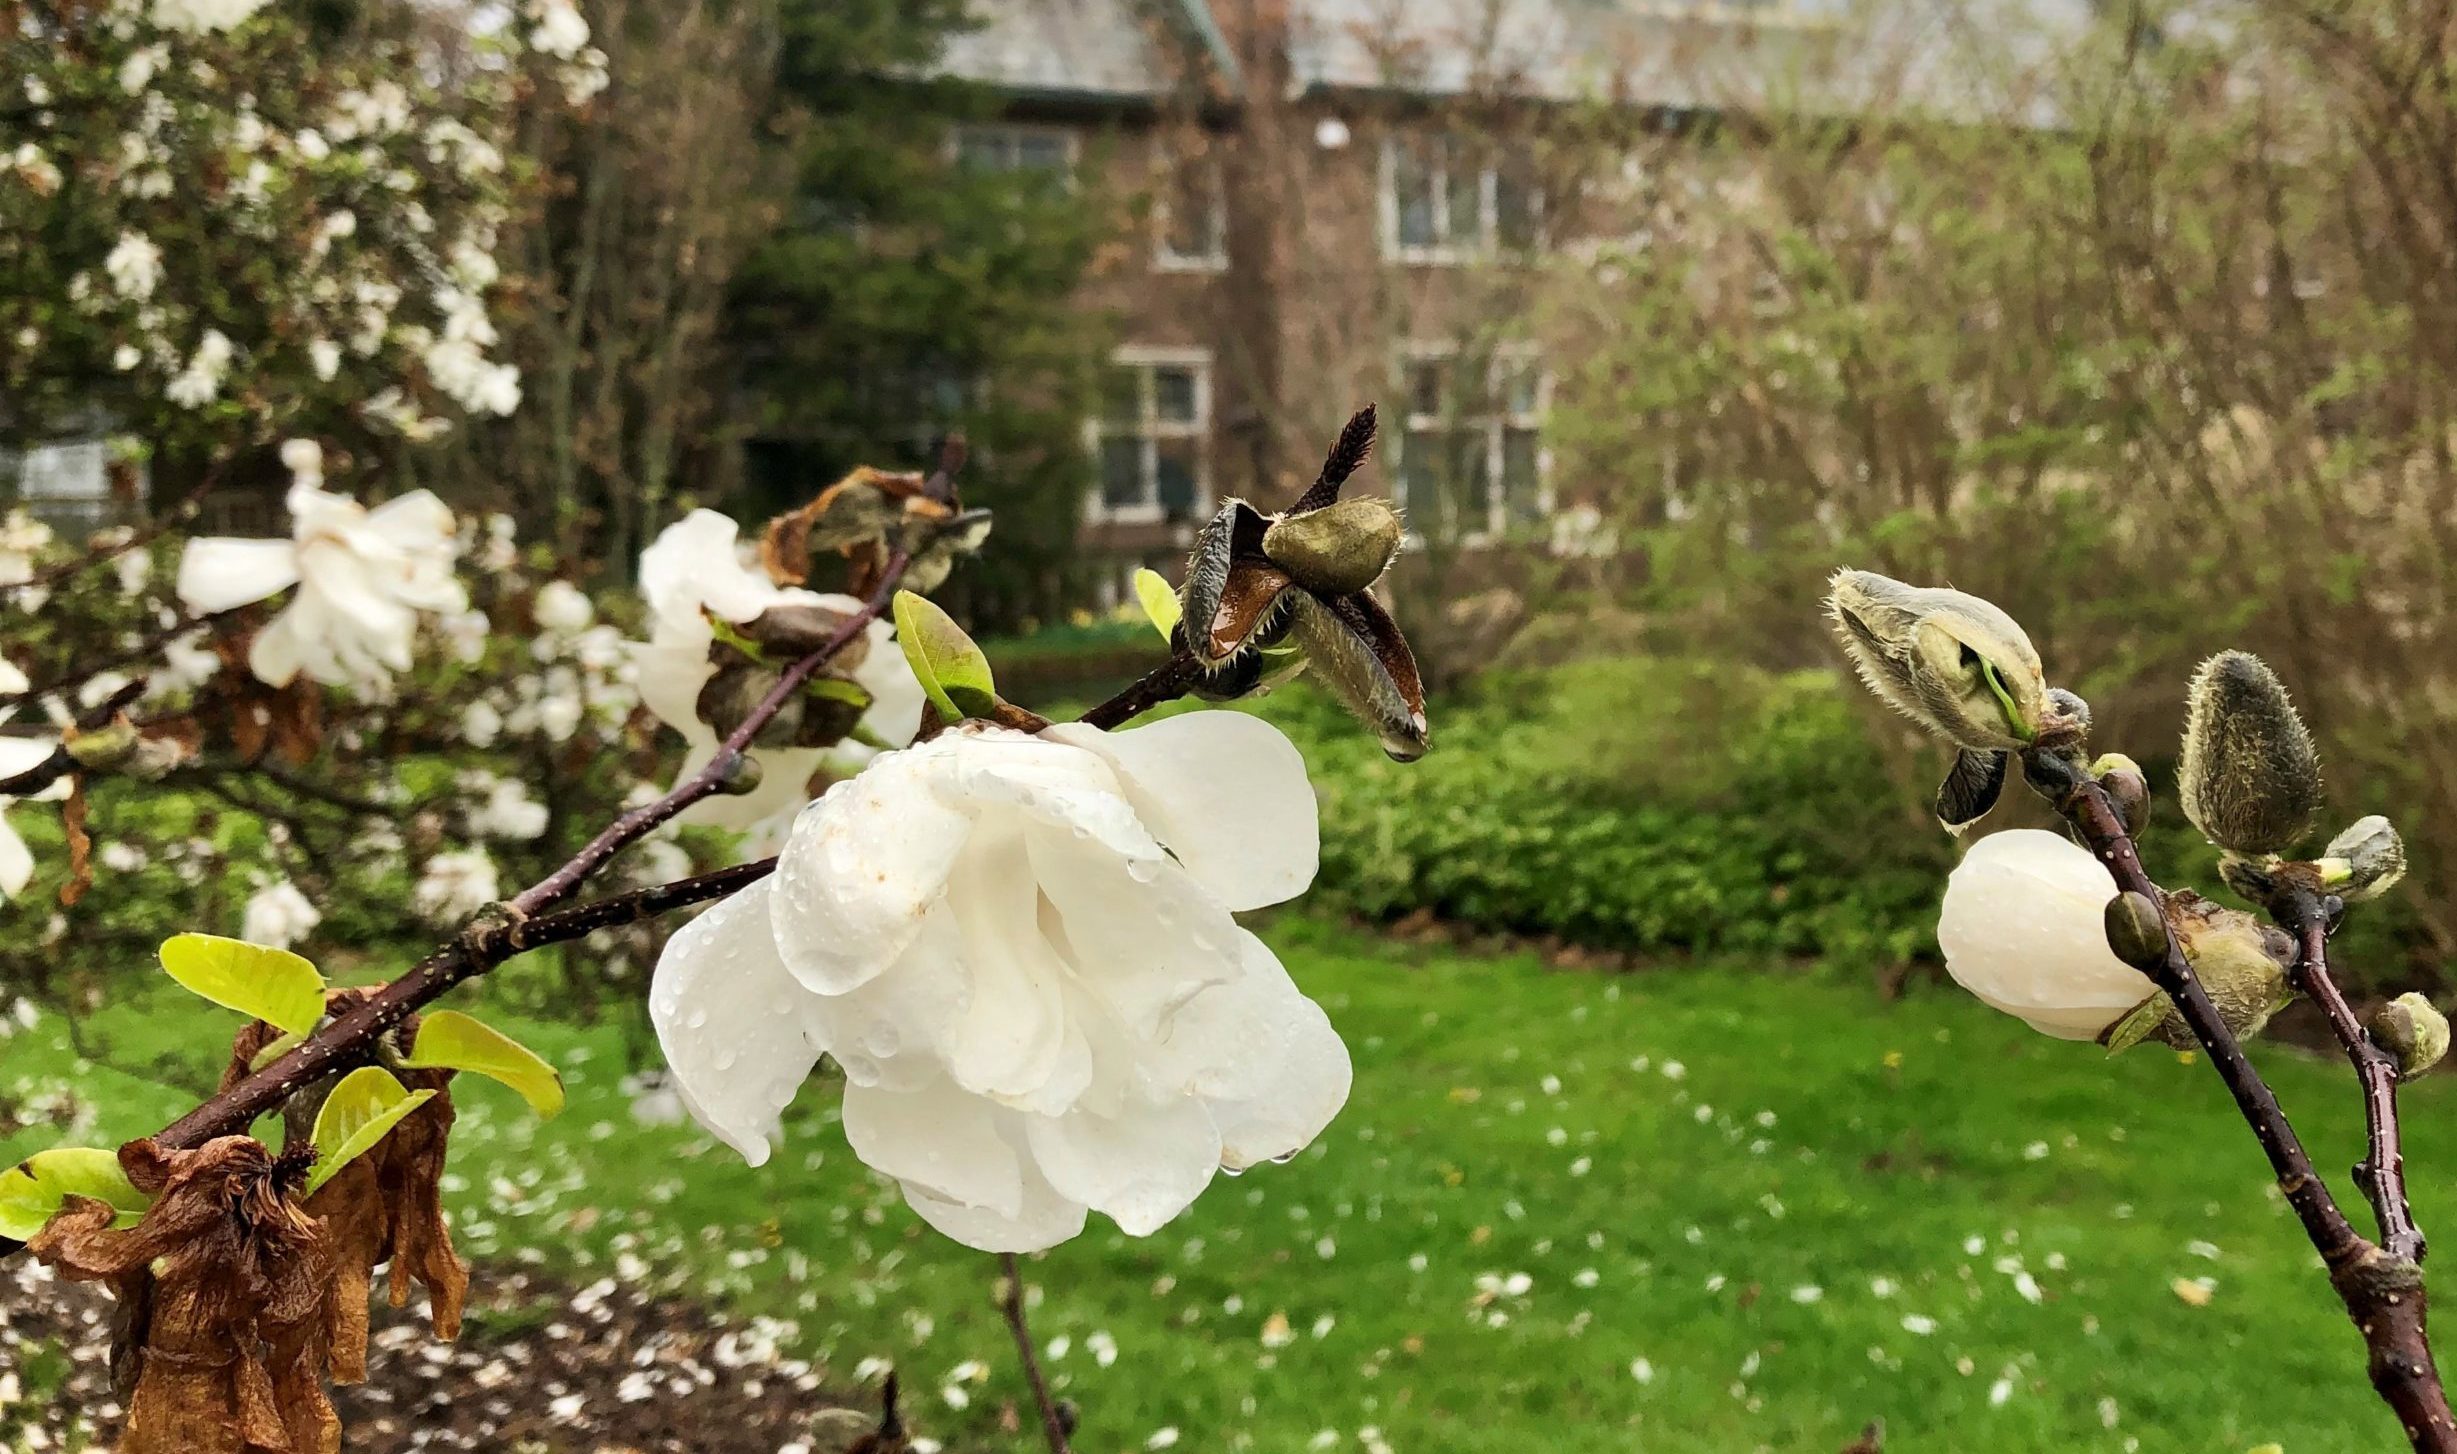 A magnolia bloom in the foreground with the house at Applewood in the background